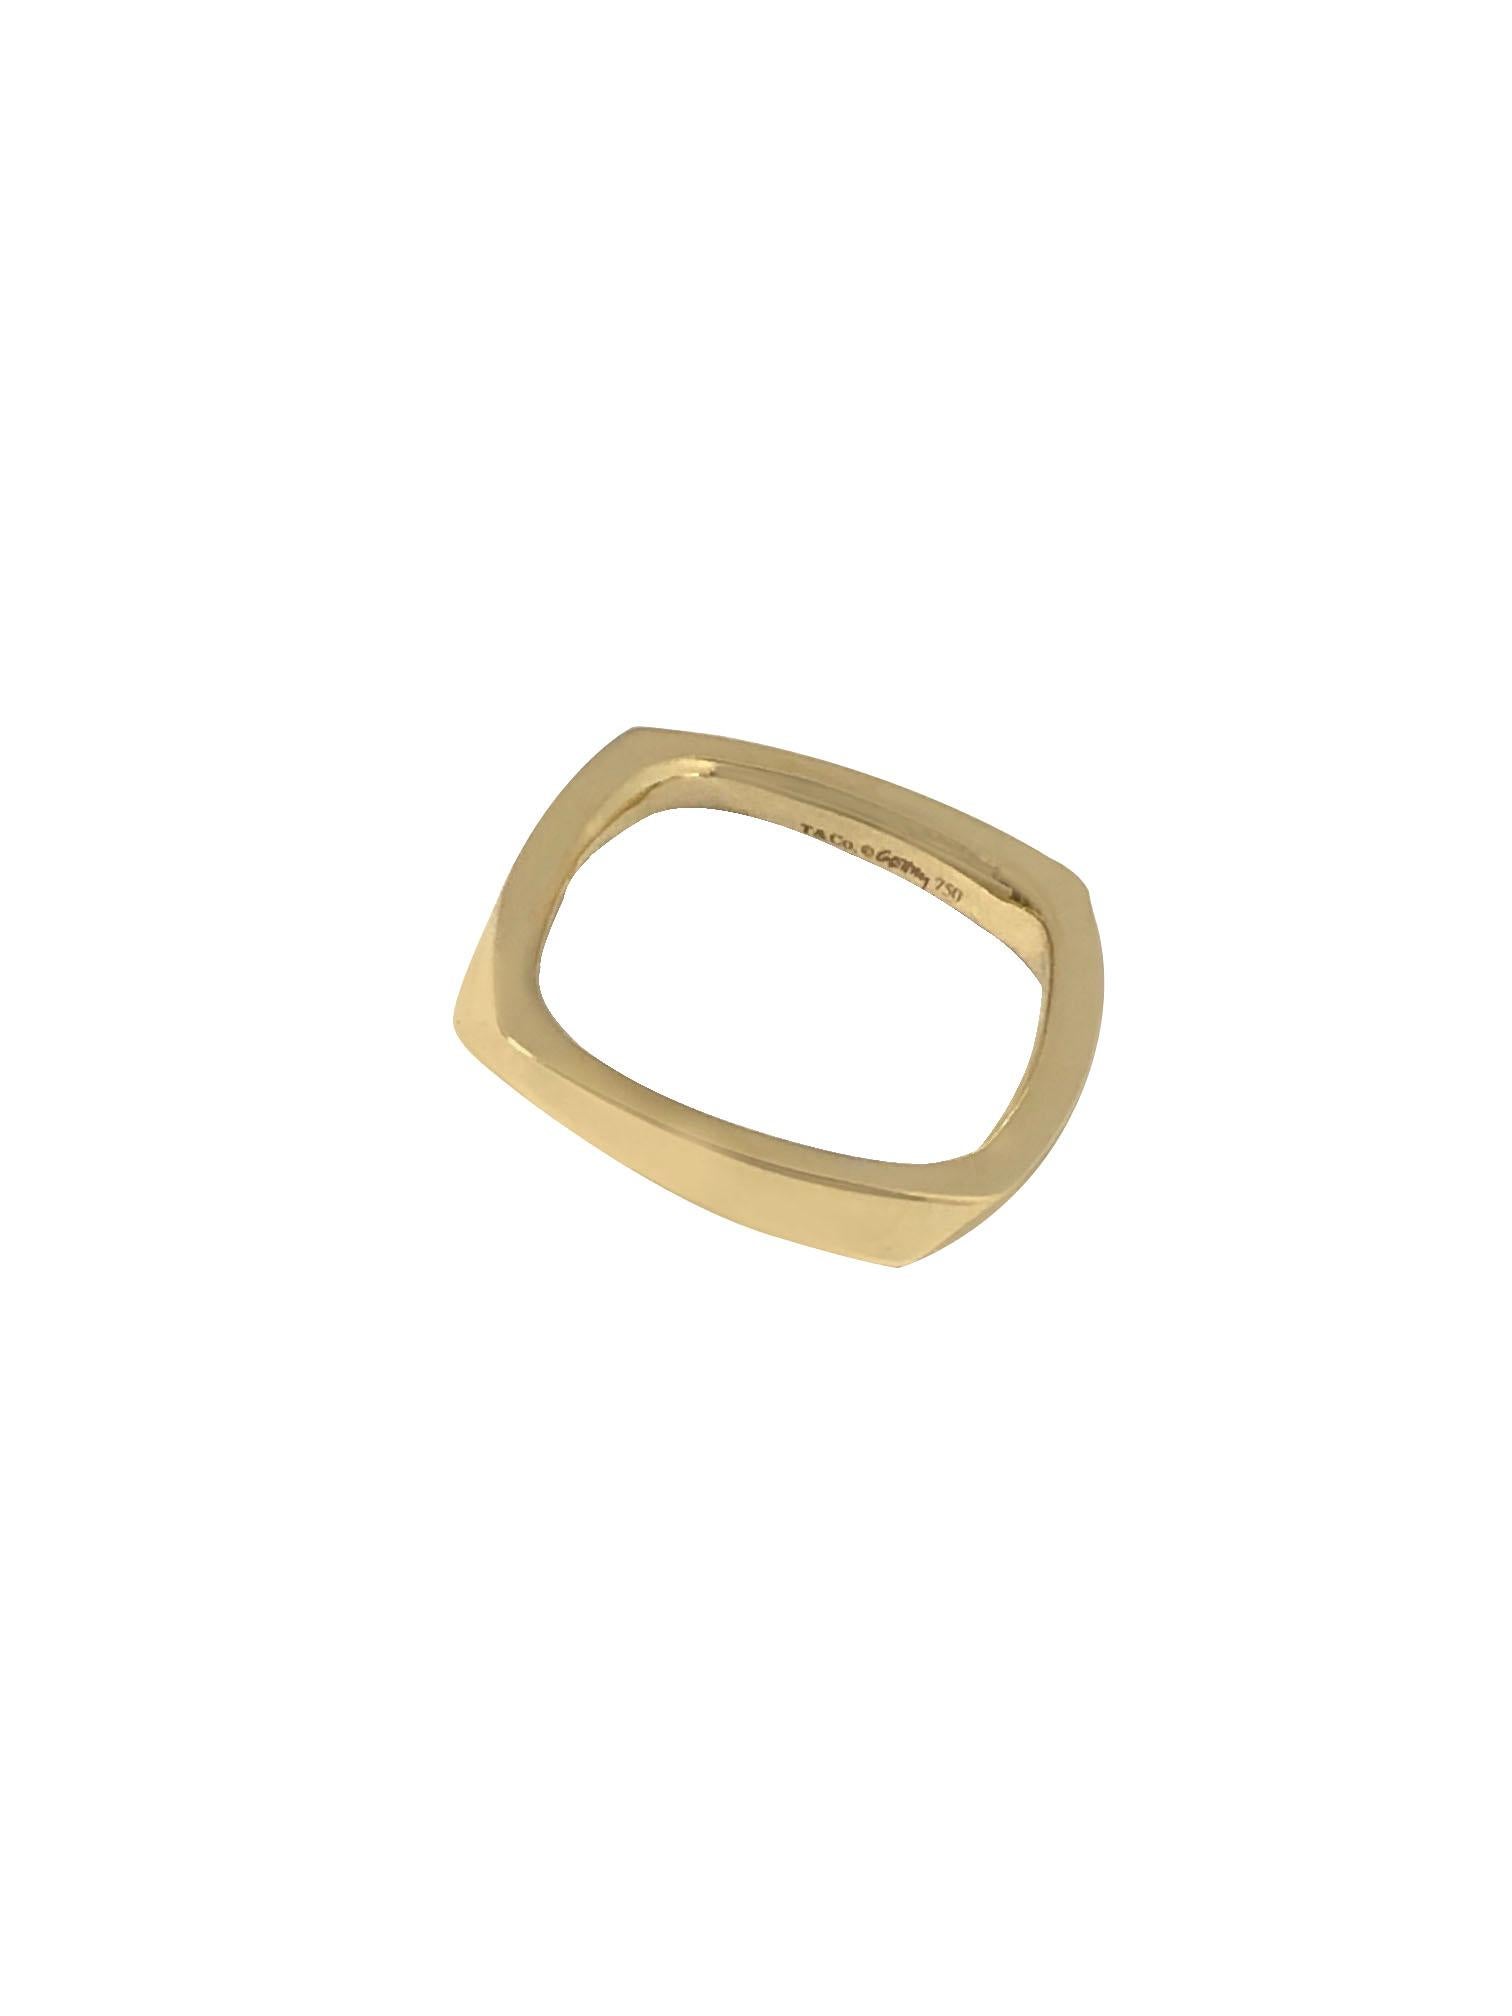 Circa 2014 Frank Gehry for Tiffany & Company 18K yellow Gold Torque Ring, 2.5 M.M. wide and weighing 6.3 Grams, finger size 7 1/4.